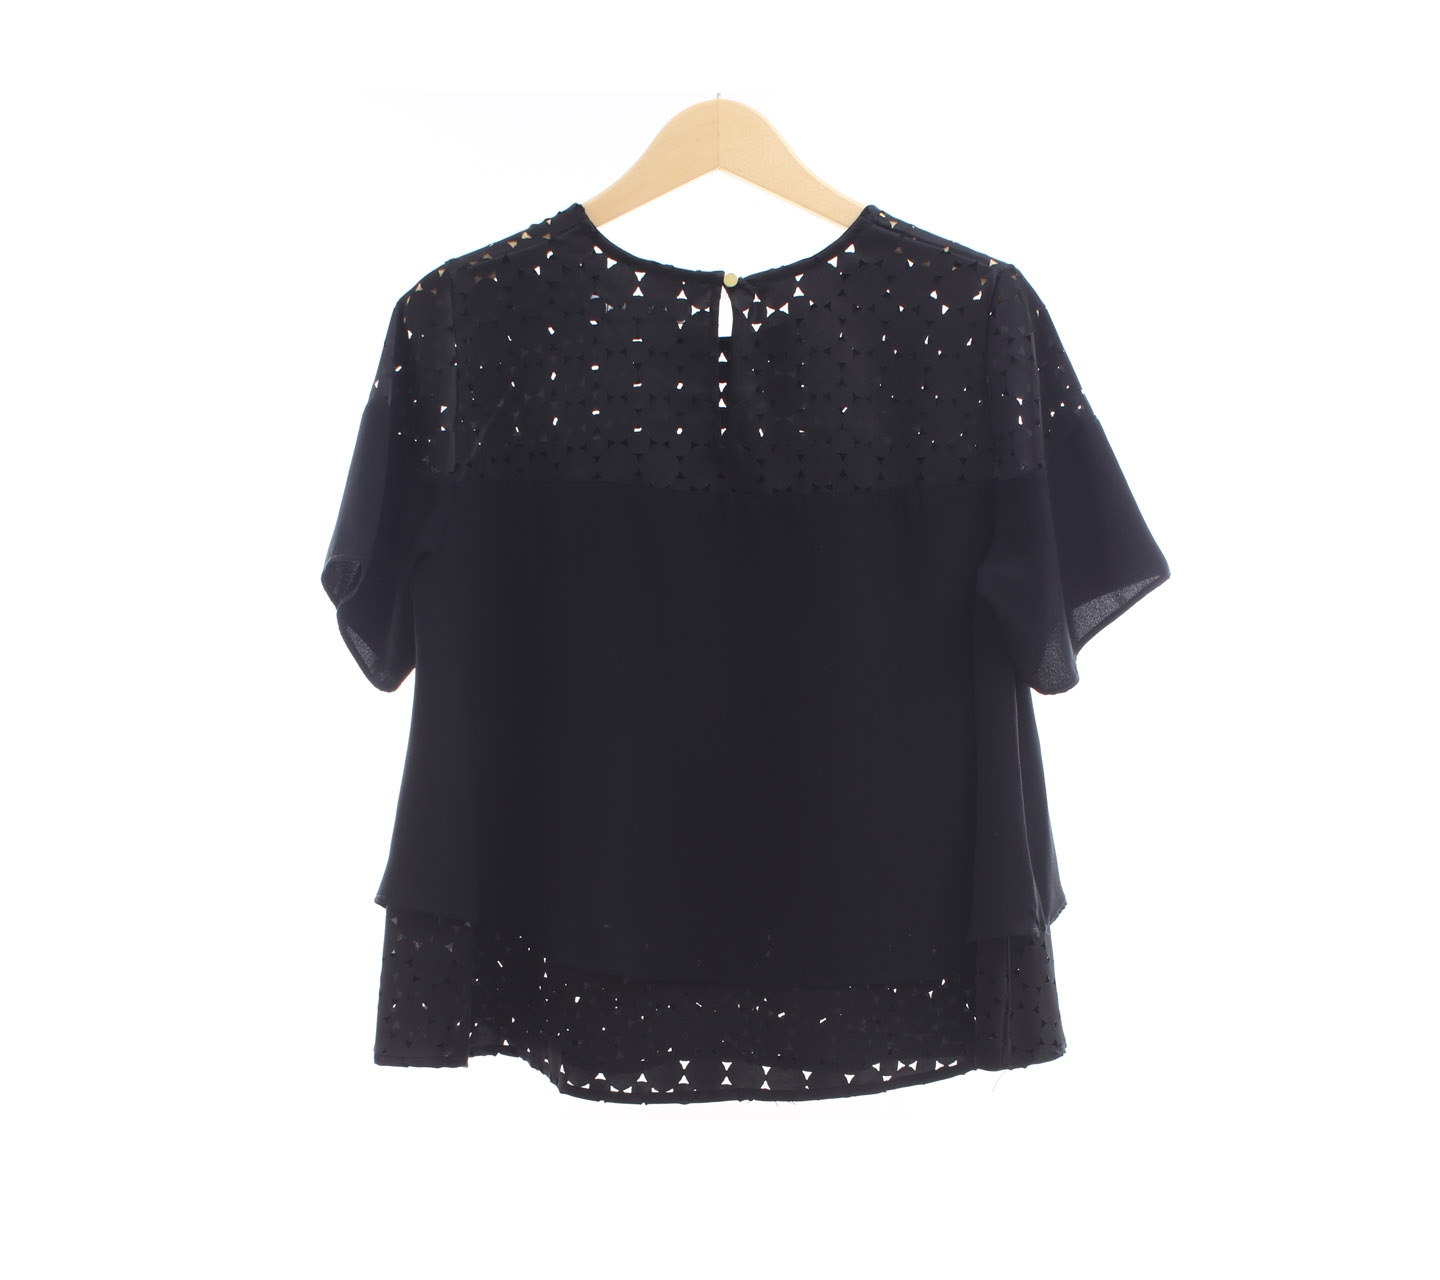 Cotton Ink Black Perforated Blouse